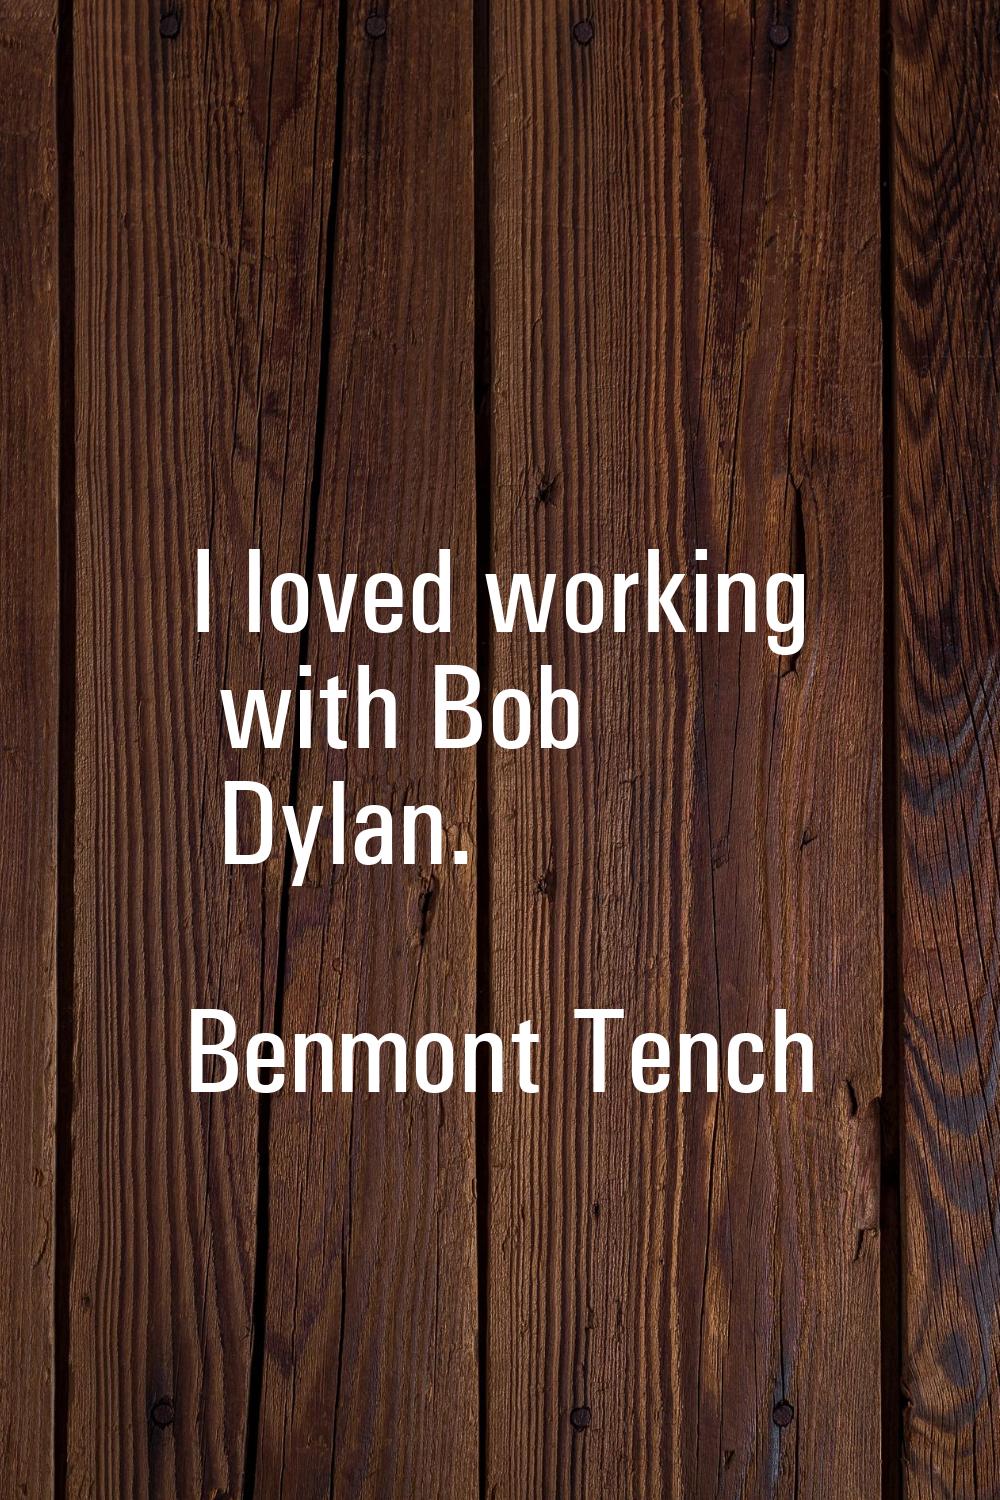 I loved working with Bob Dylan.